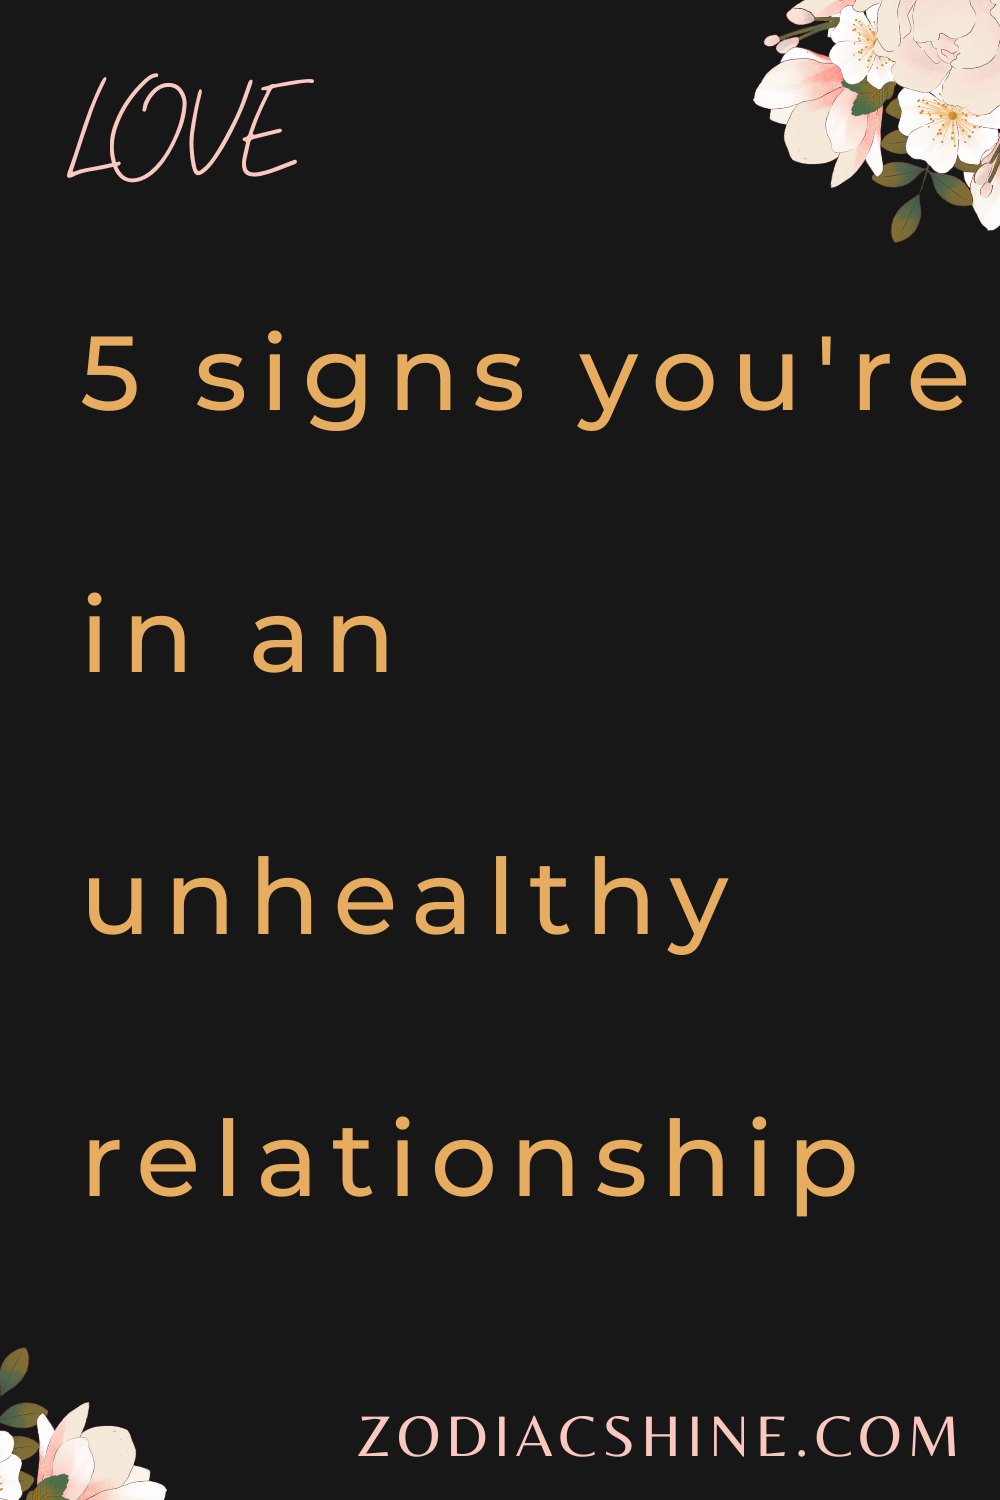 5 signs you're in an unhealthy relationship